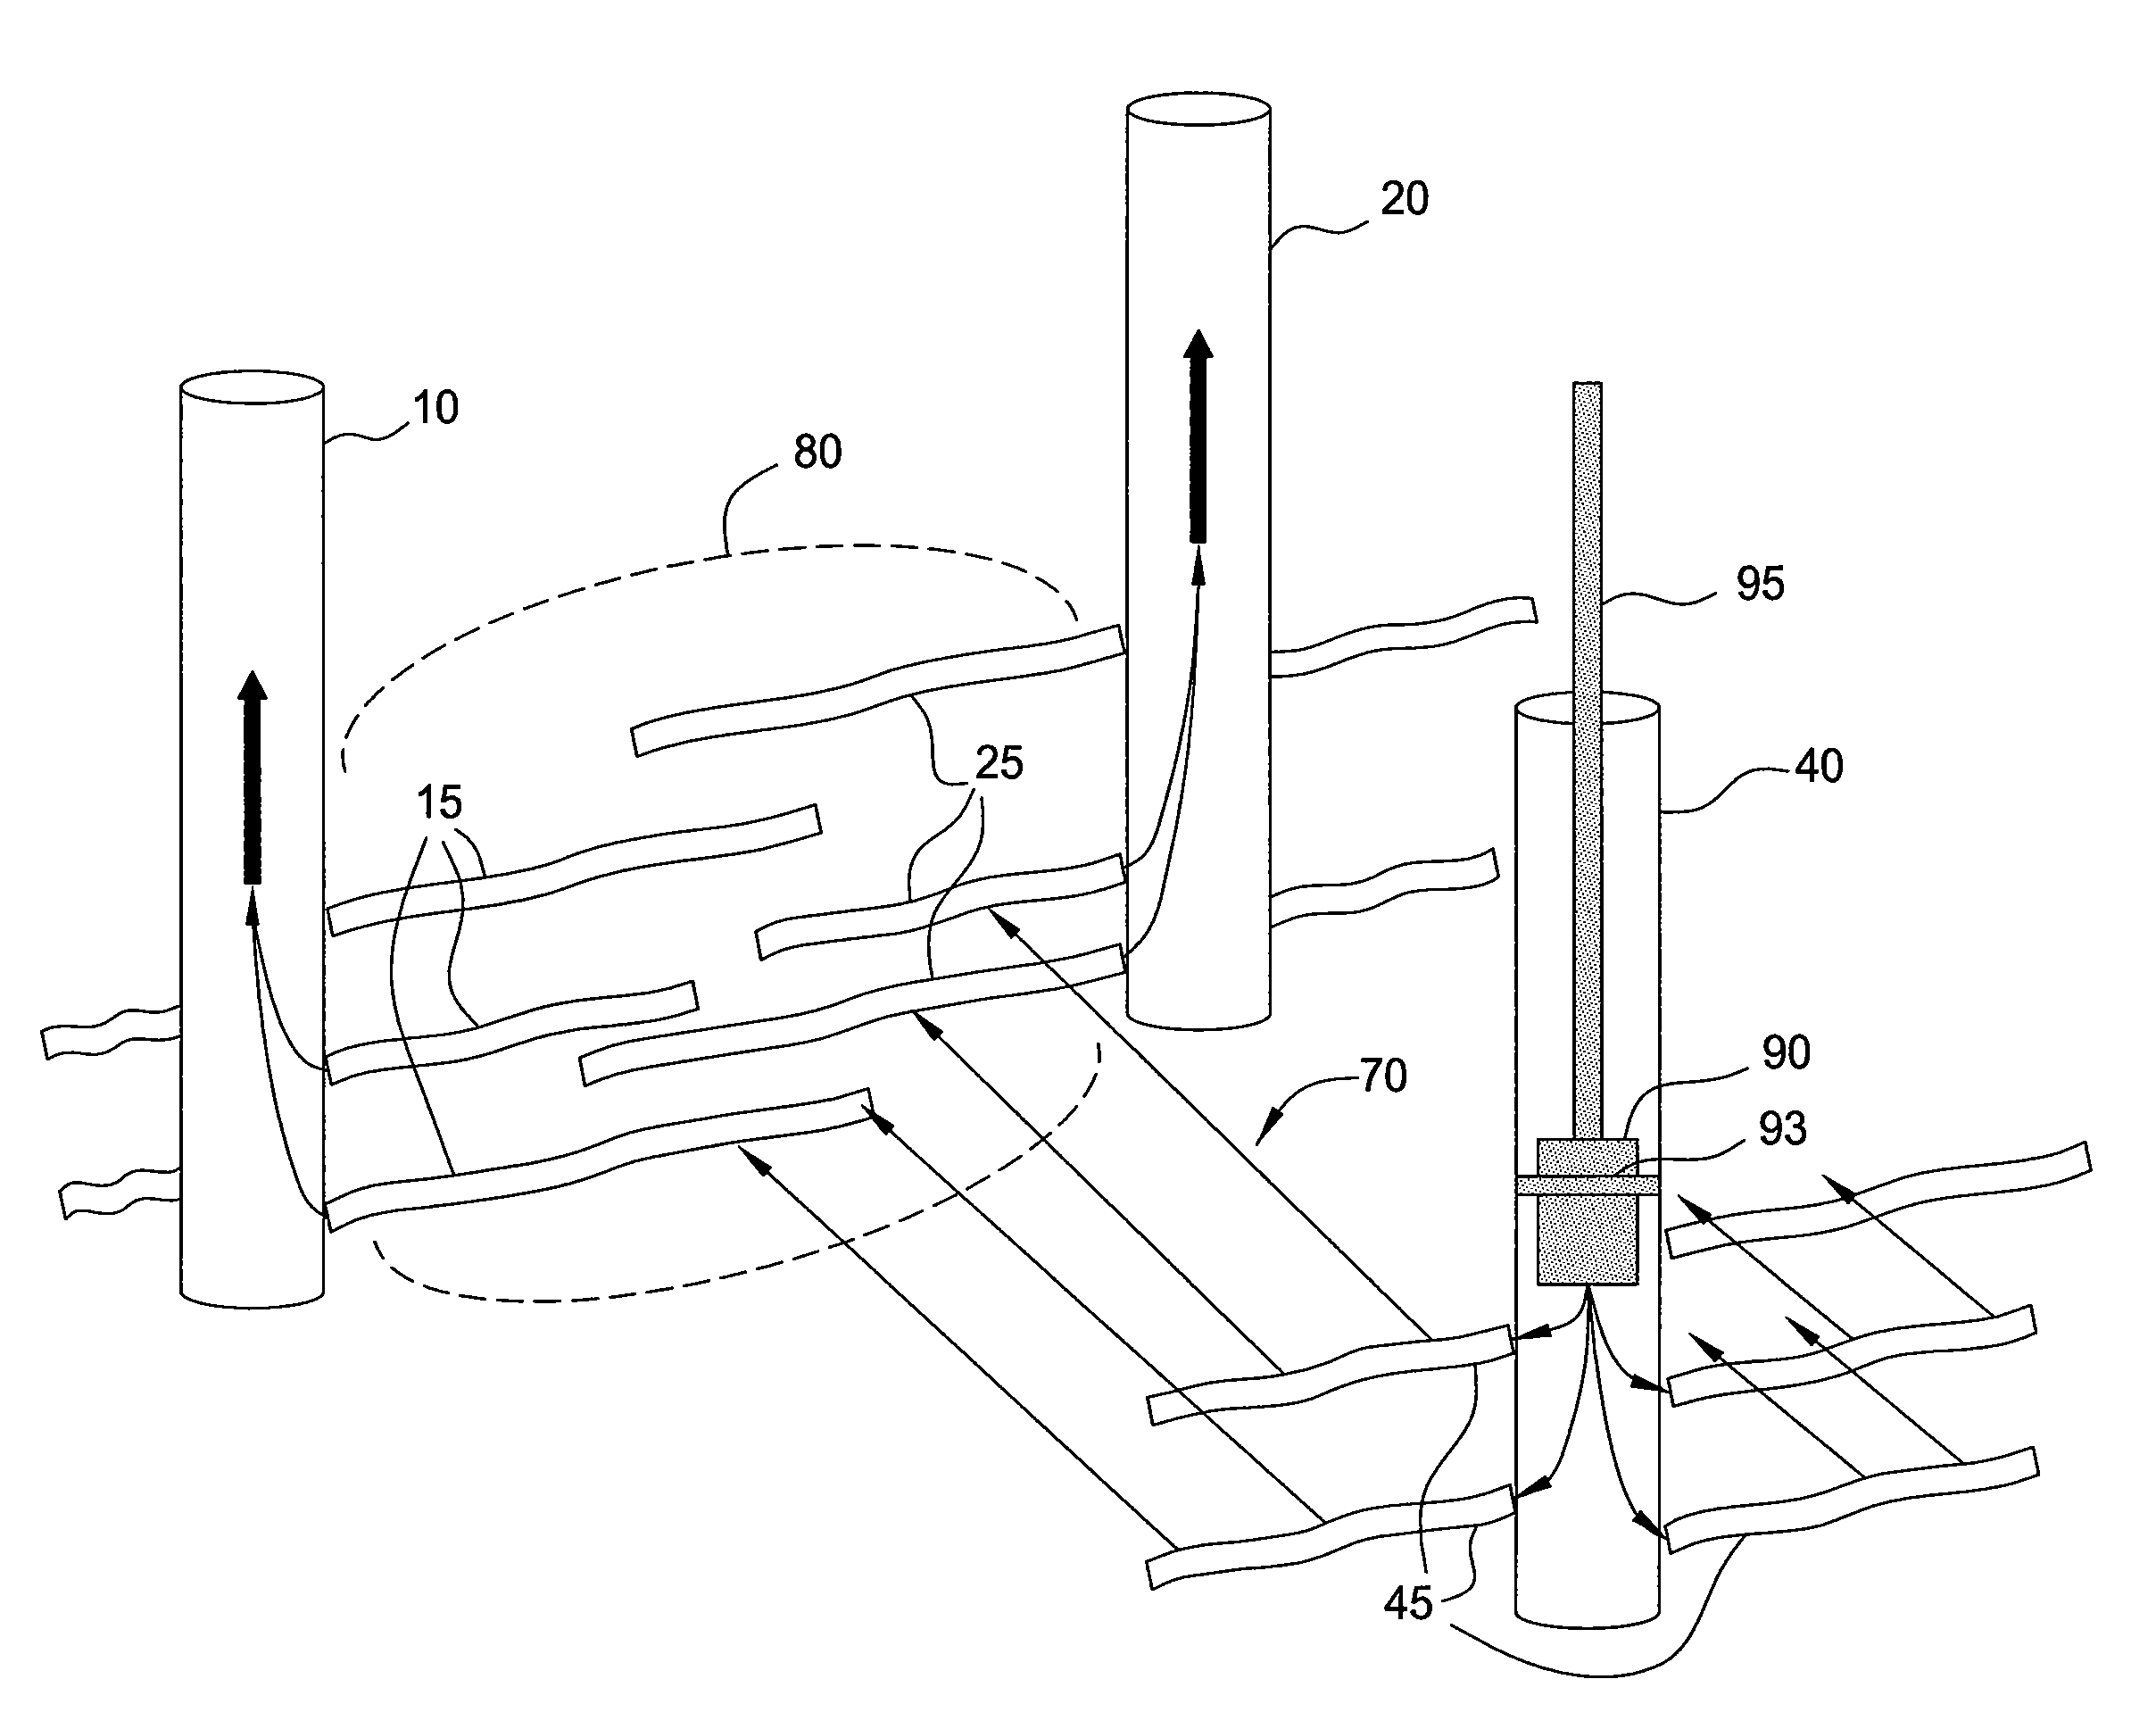 Method for recovering hydrocarbons using cold heavy oil production with sand (CHOPS) and downhole steam generation